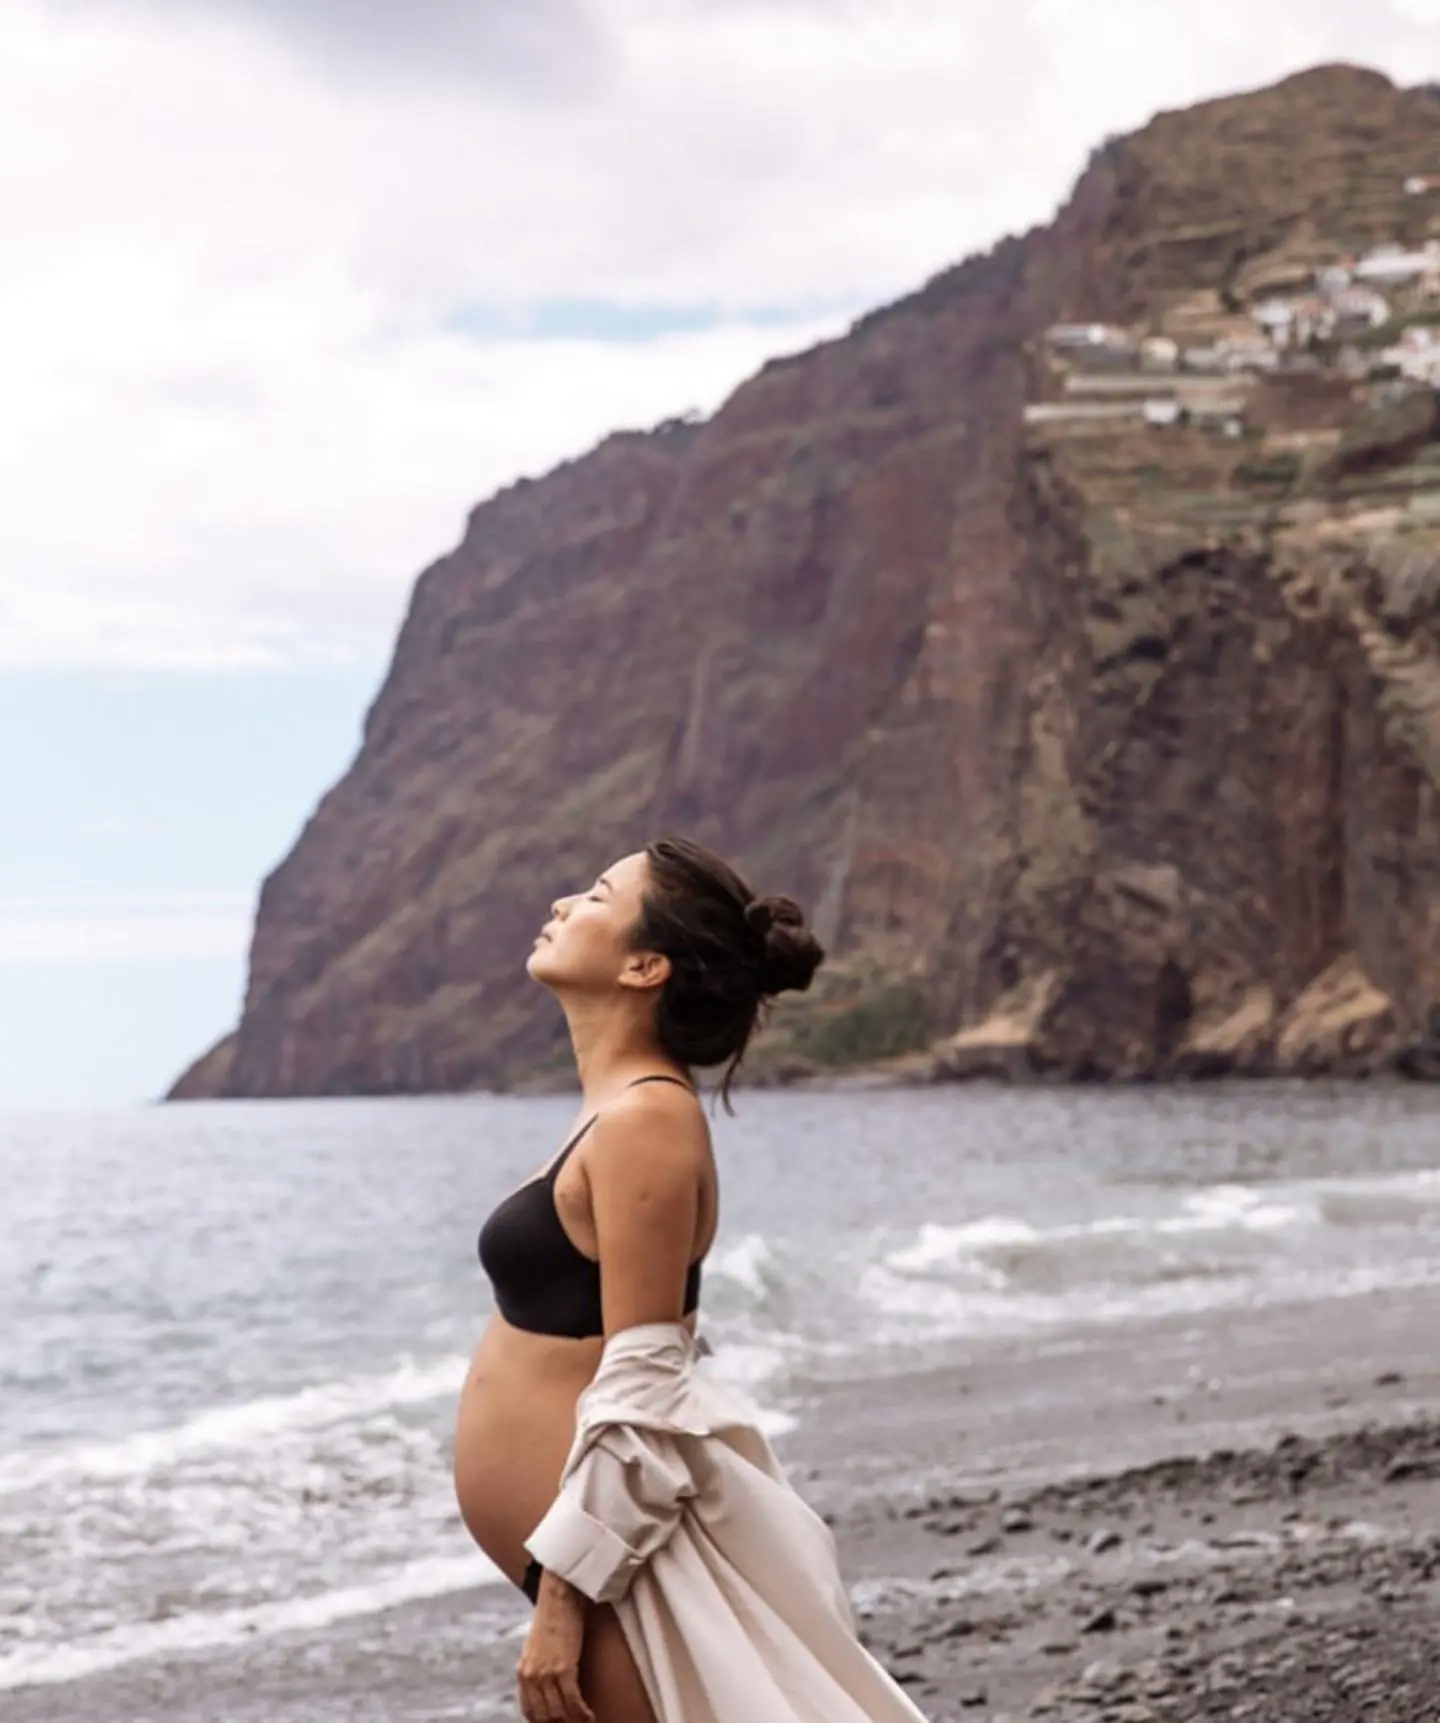 Jani Zhao with a pregnant belly, wearing a white top and black bottoms, standing on the beach near the water. Photographer: KAT V Photography.